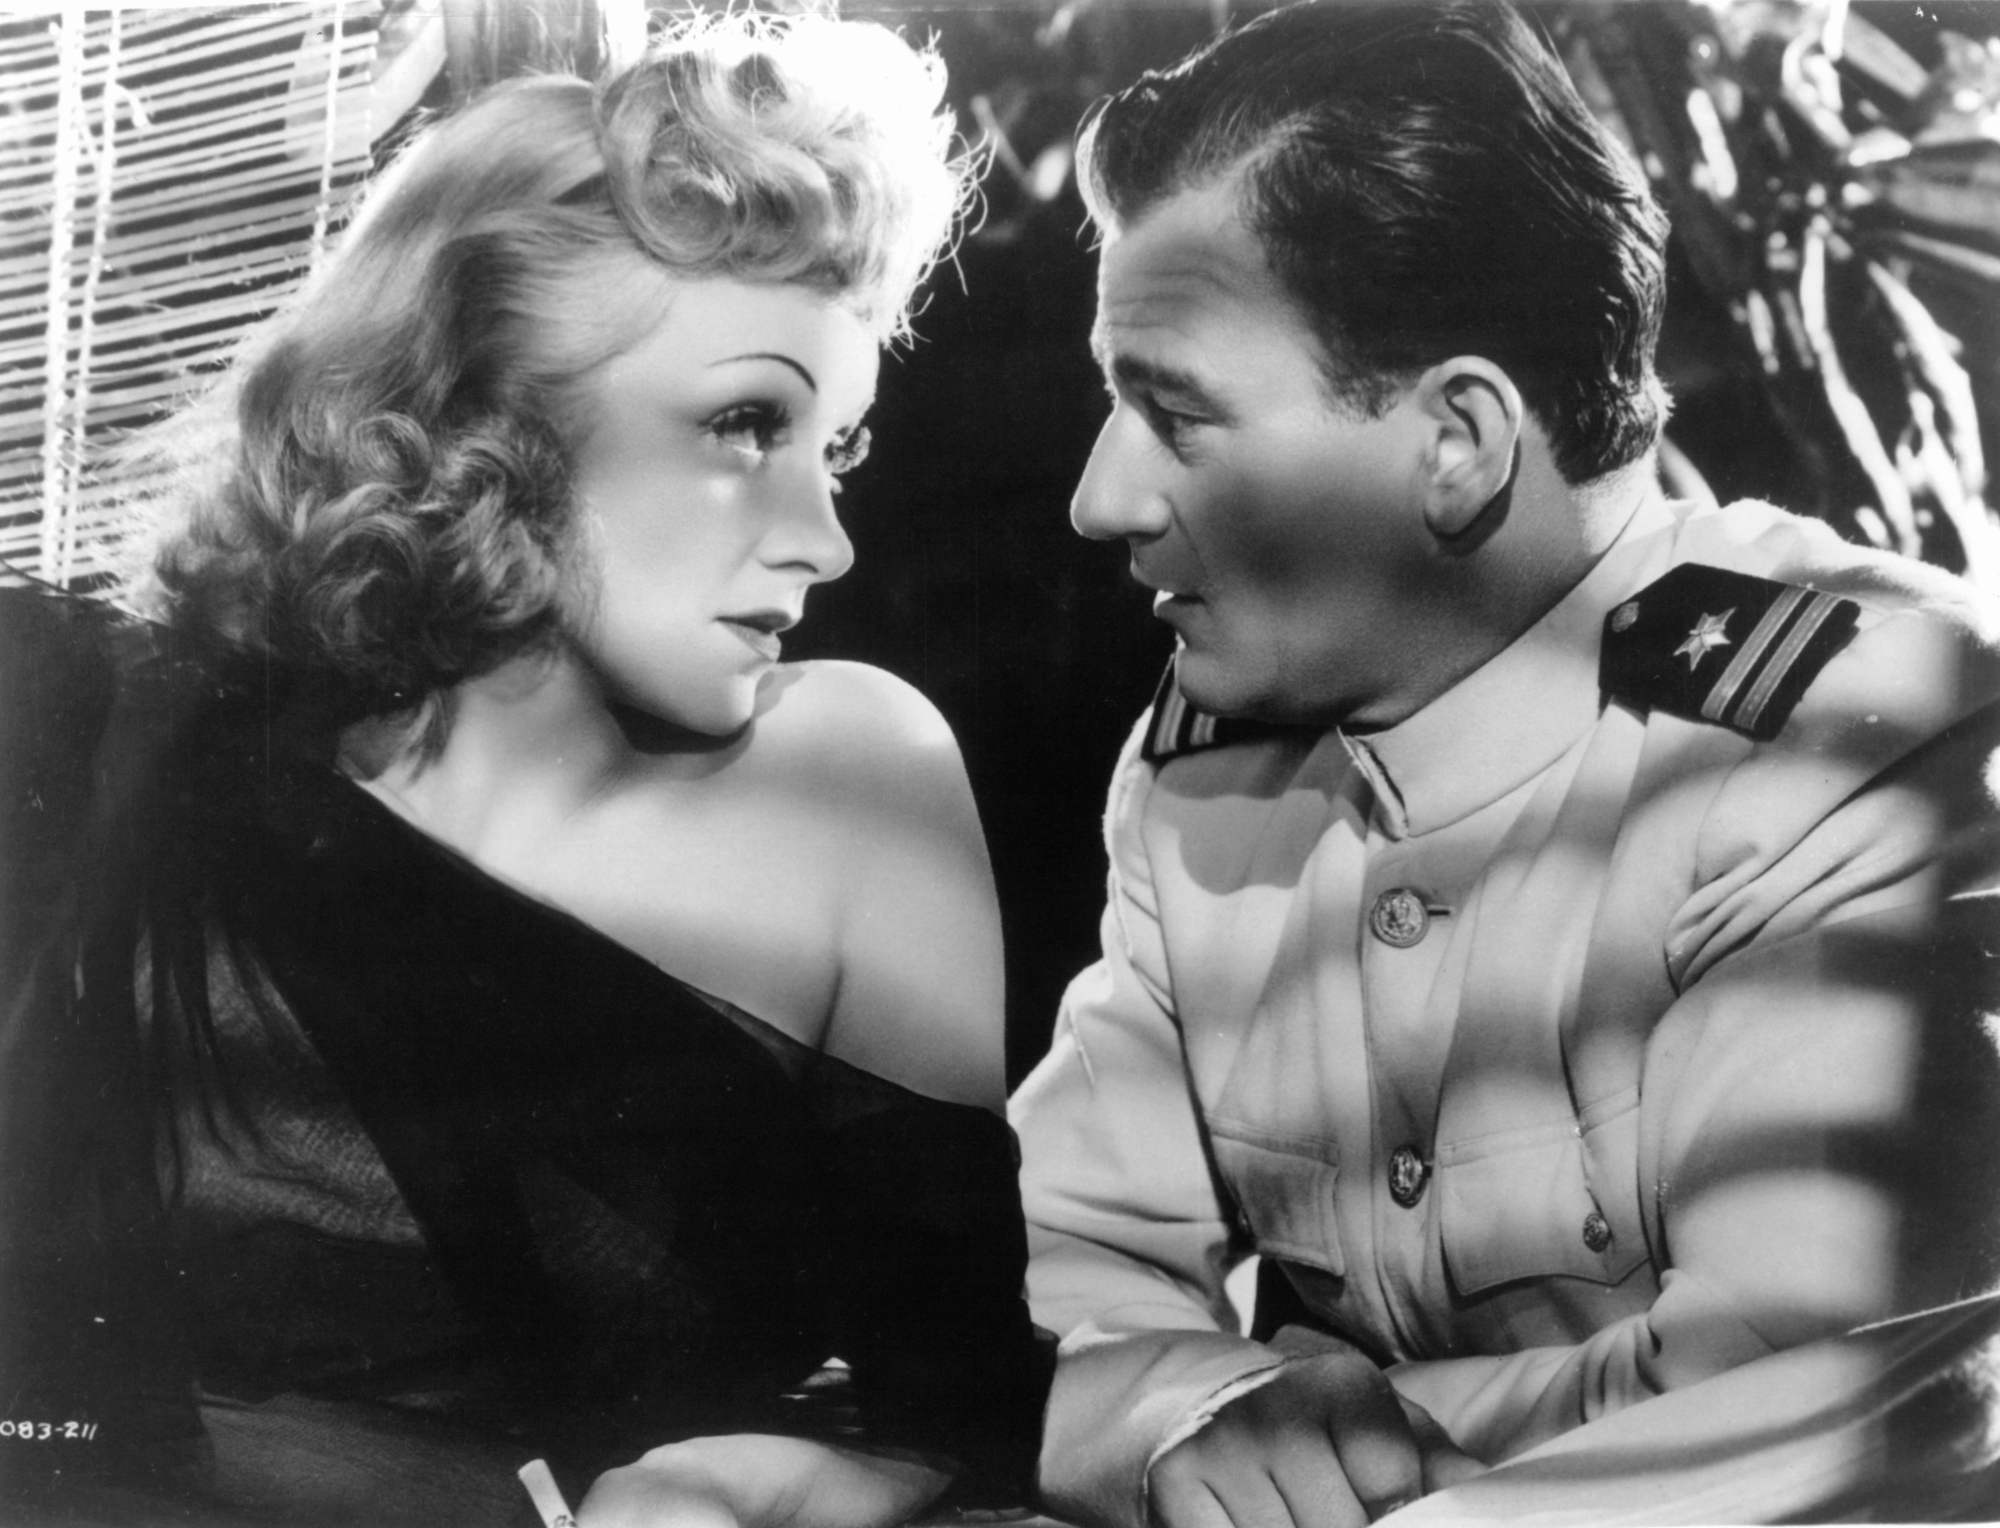 'Seven Sinners' Marlene Dietrich and John Wayne looking into each other's eyes.